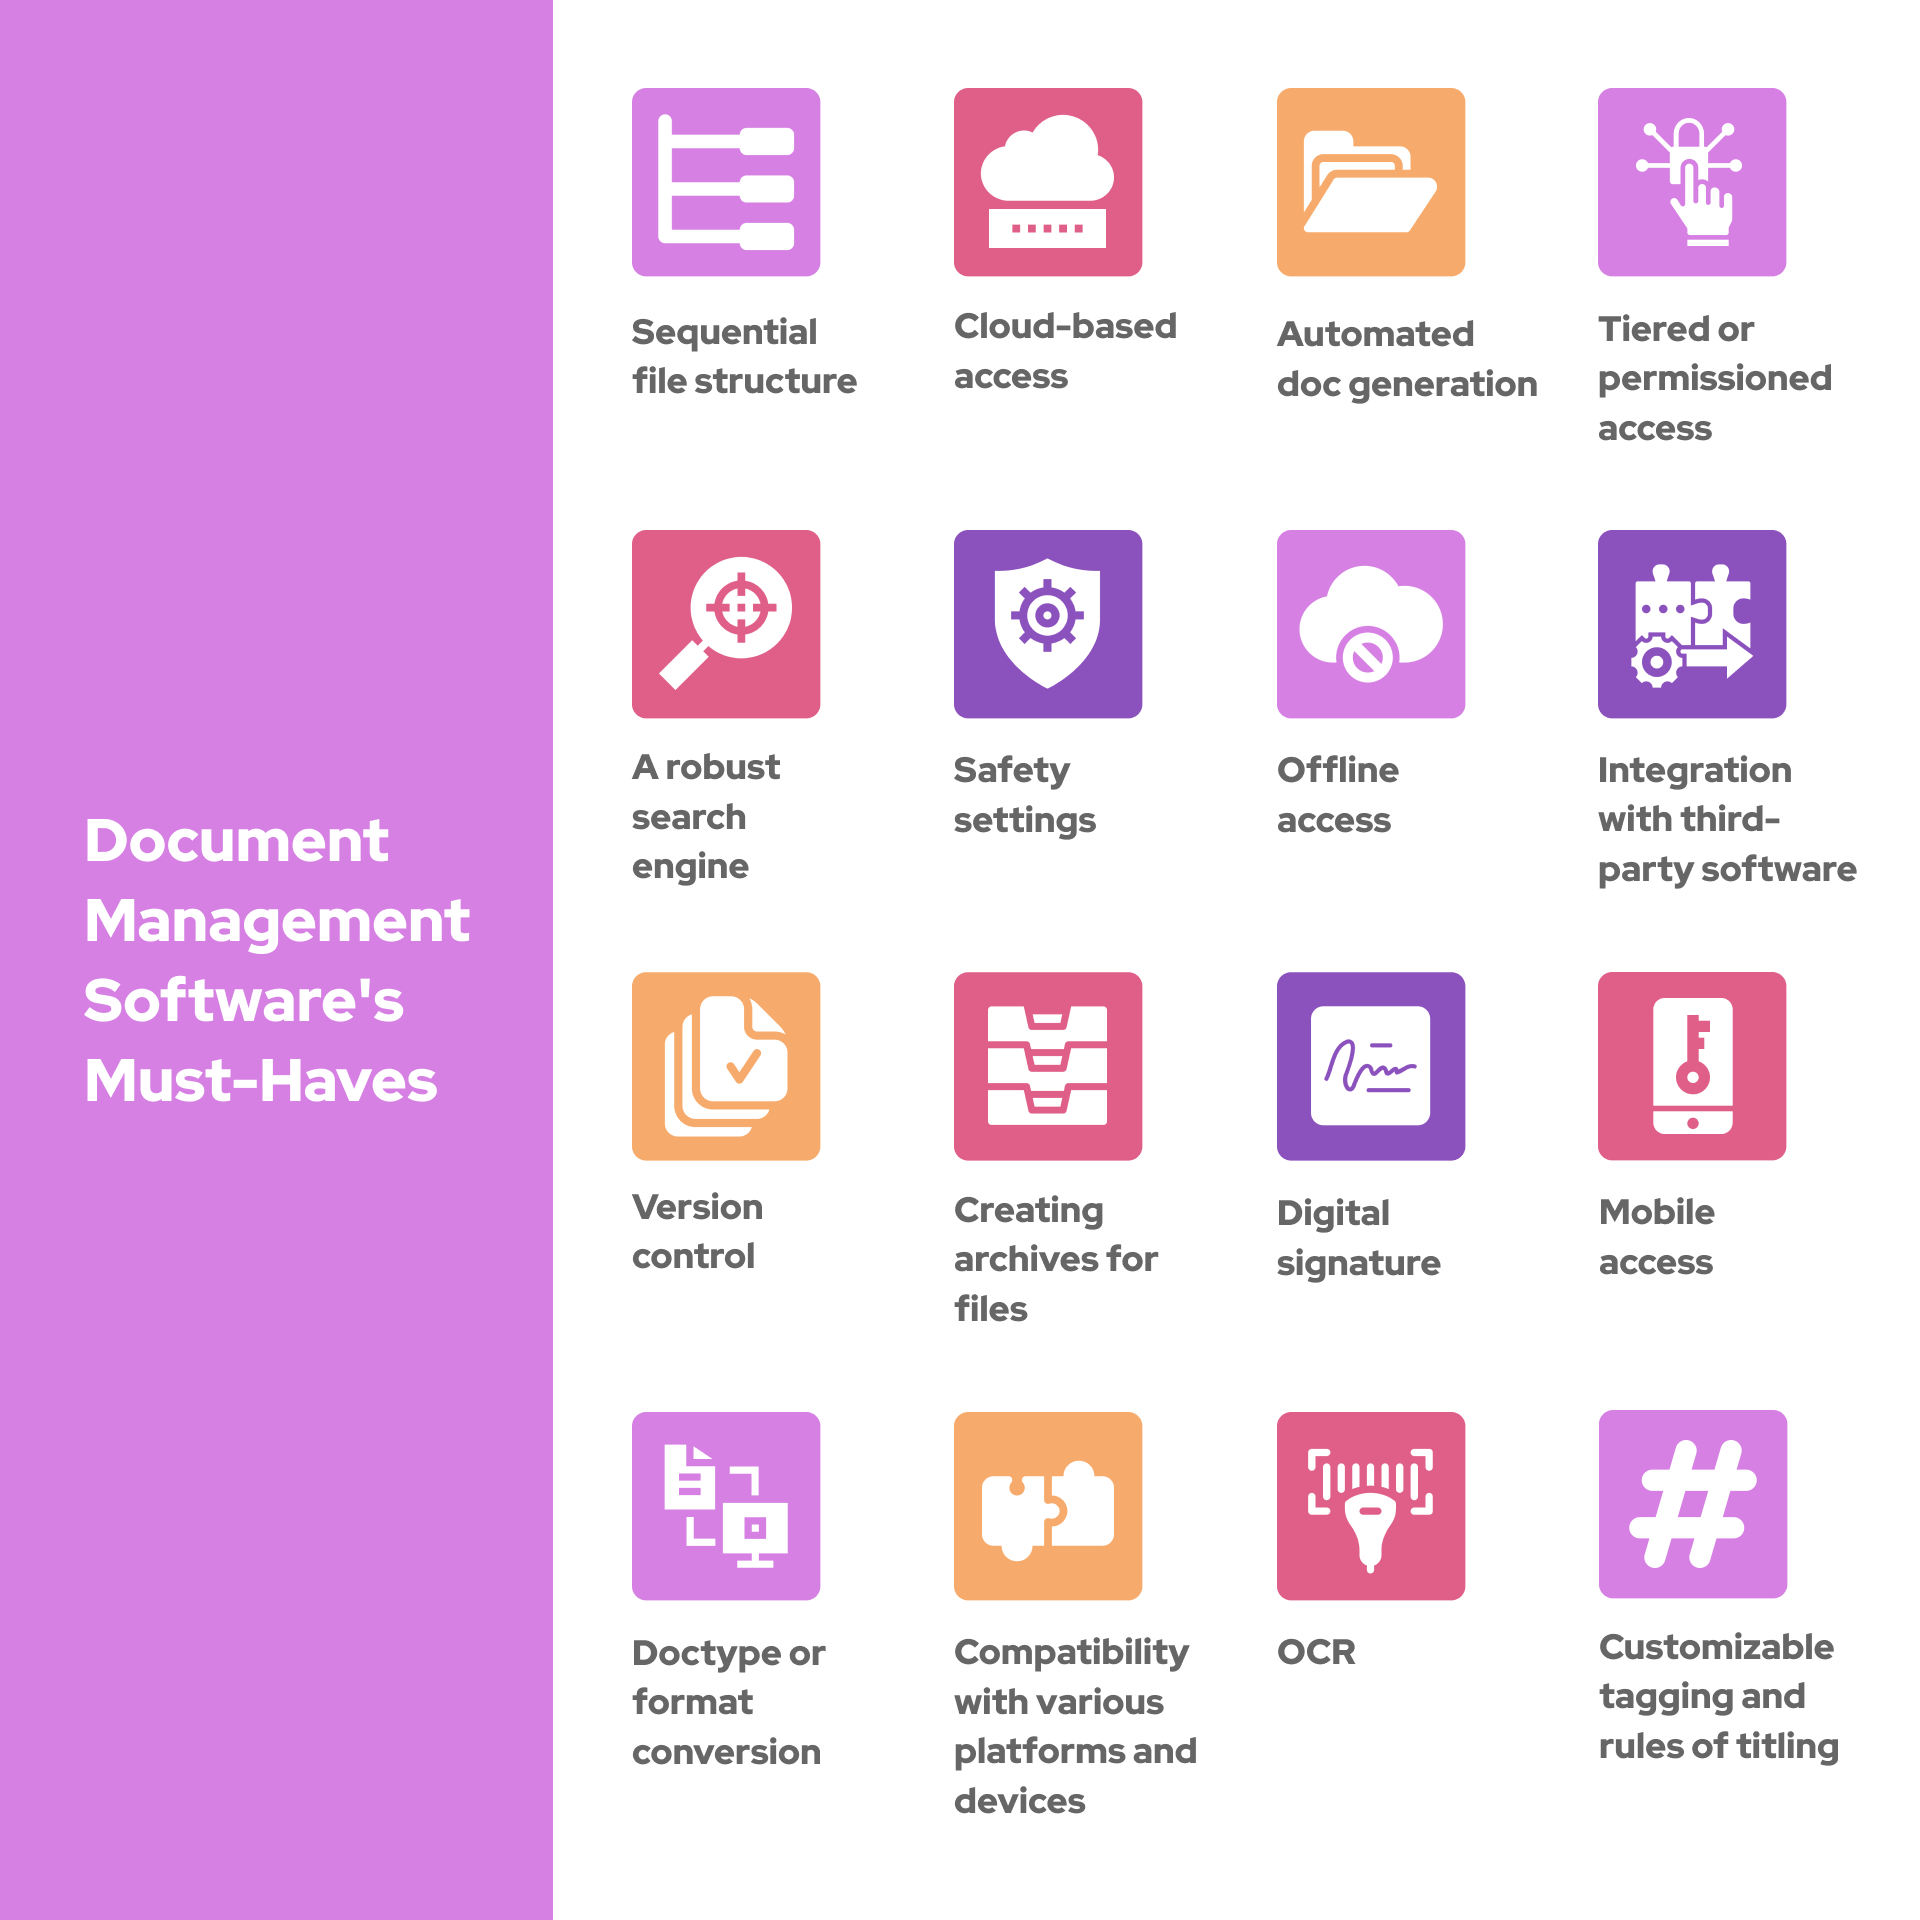 A document management software has many features to speed up business processes, allow accessing files, secure documents, and more.